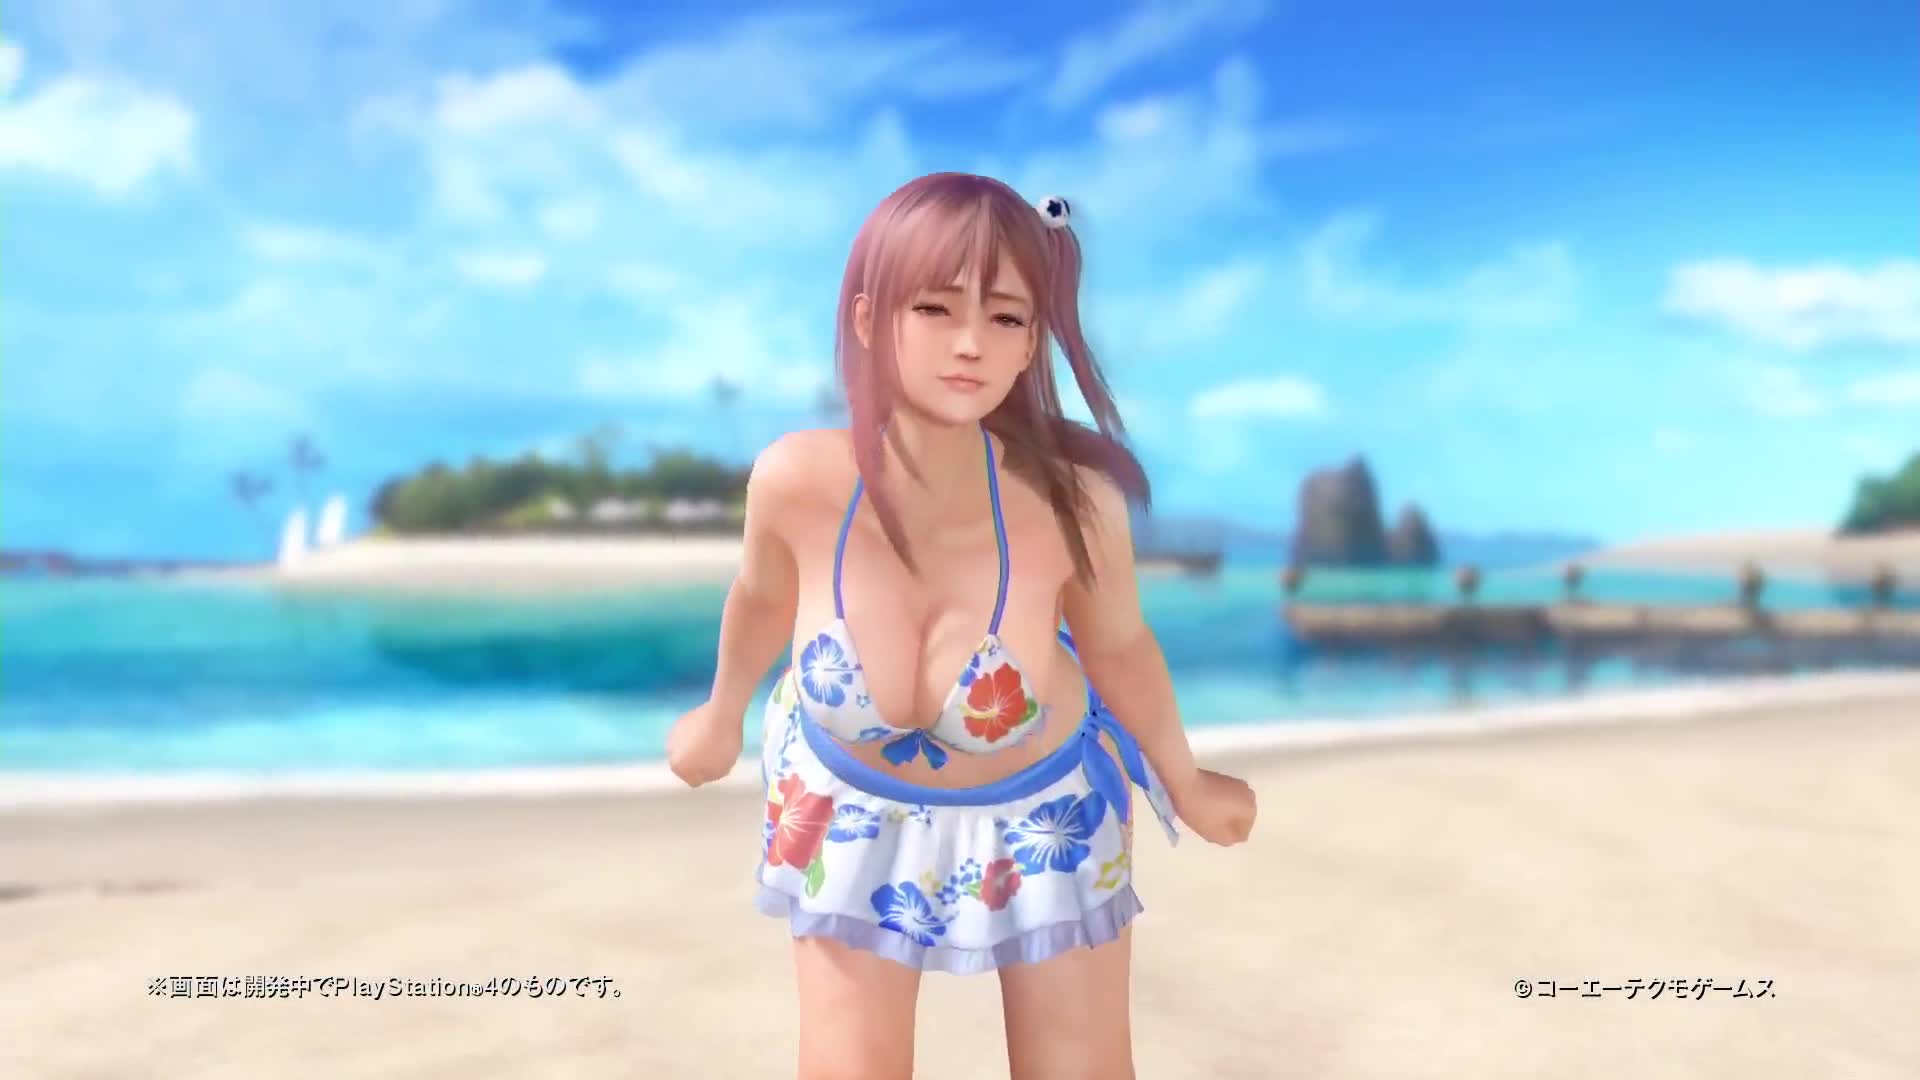 Dead or Alive Xtreme 3 - PS4 trailer